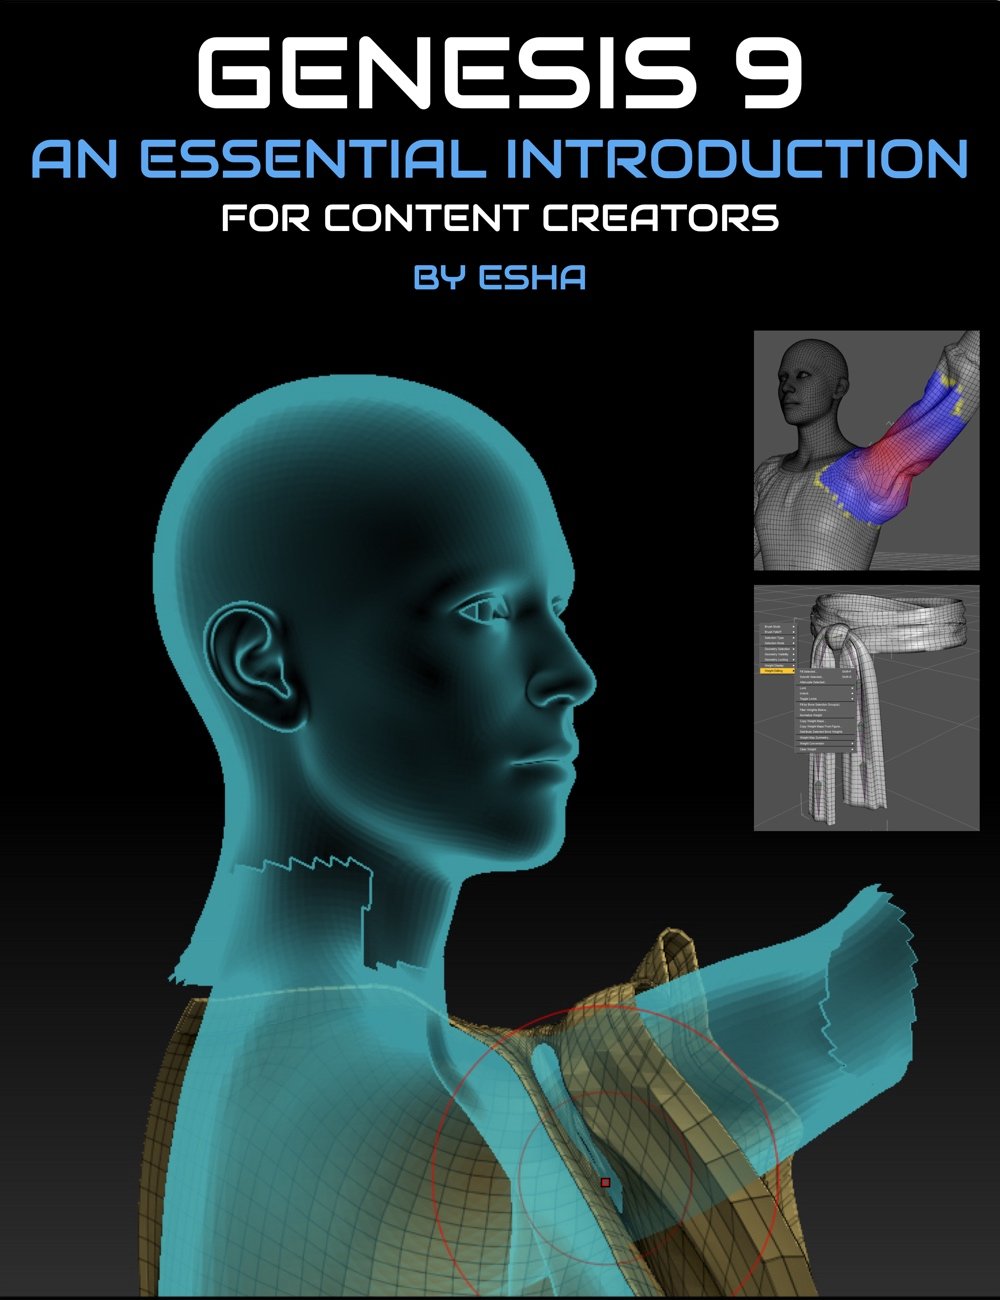 Essential Introduction to Genesis 9 for Content Creators by: Digital Art Liveesha, 3D Models by Daz 3D